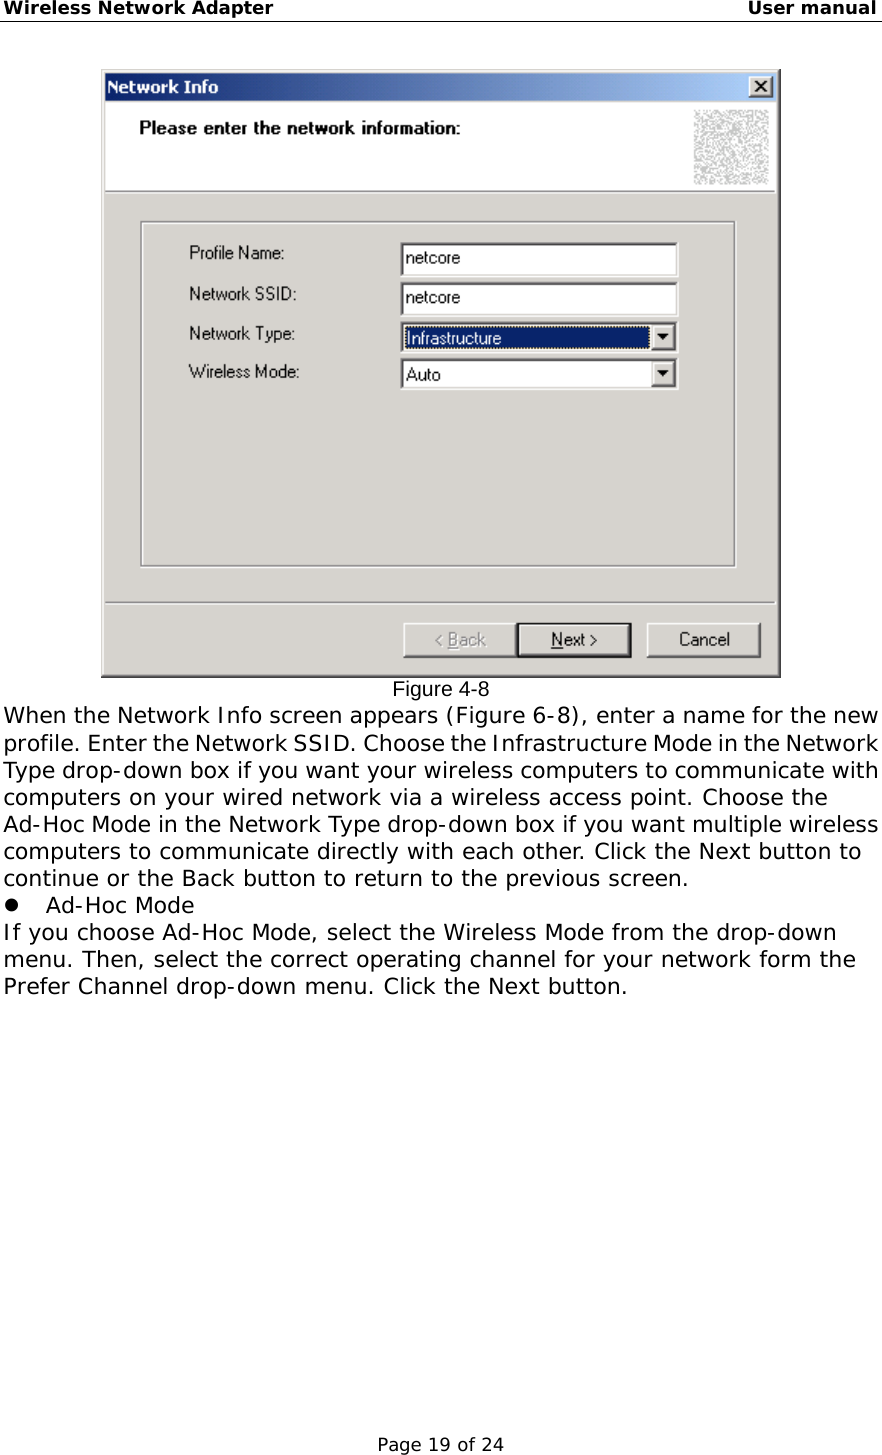 Wireless Network Adapter                                                    User manual Page 19 of 24  Figure 4-8 When the Network Info screen appears (Figure 6-8), enter a name for the new profile. Enter the Network SSID. Choose the Infrastructure Mode in the Network Type drop-down box if you want your wireless computers to communicate with computers on your wired network via a wireless access point. Choose the Ad-Hoc Mode in the Network Type drop-down box if you want multiple wireless computers to communicate directly with each other. Click the Next button to continue or the Back button to return to the previous screen.    Ad-Hoc Mode If you choose Ad-Hoc Mode, select the Wireless Mode from the drop-down menu. Then, select the correct operating channel for your network form the Prefer Channel drop-down menu. Click the Next button.  